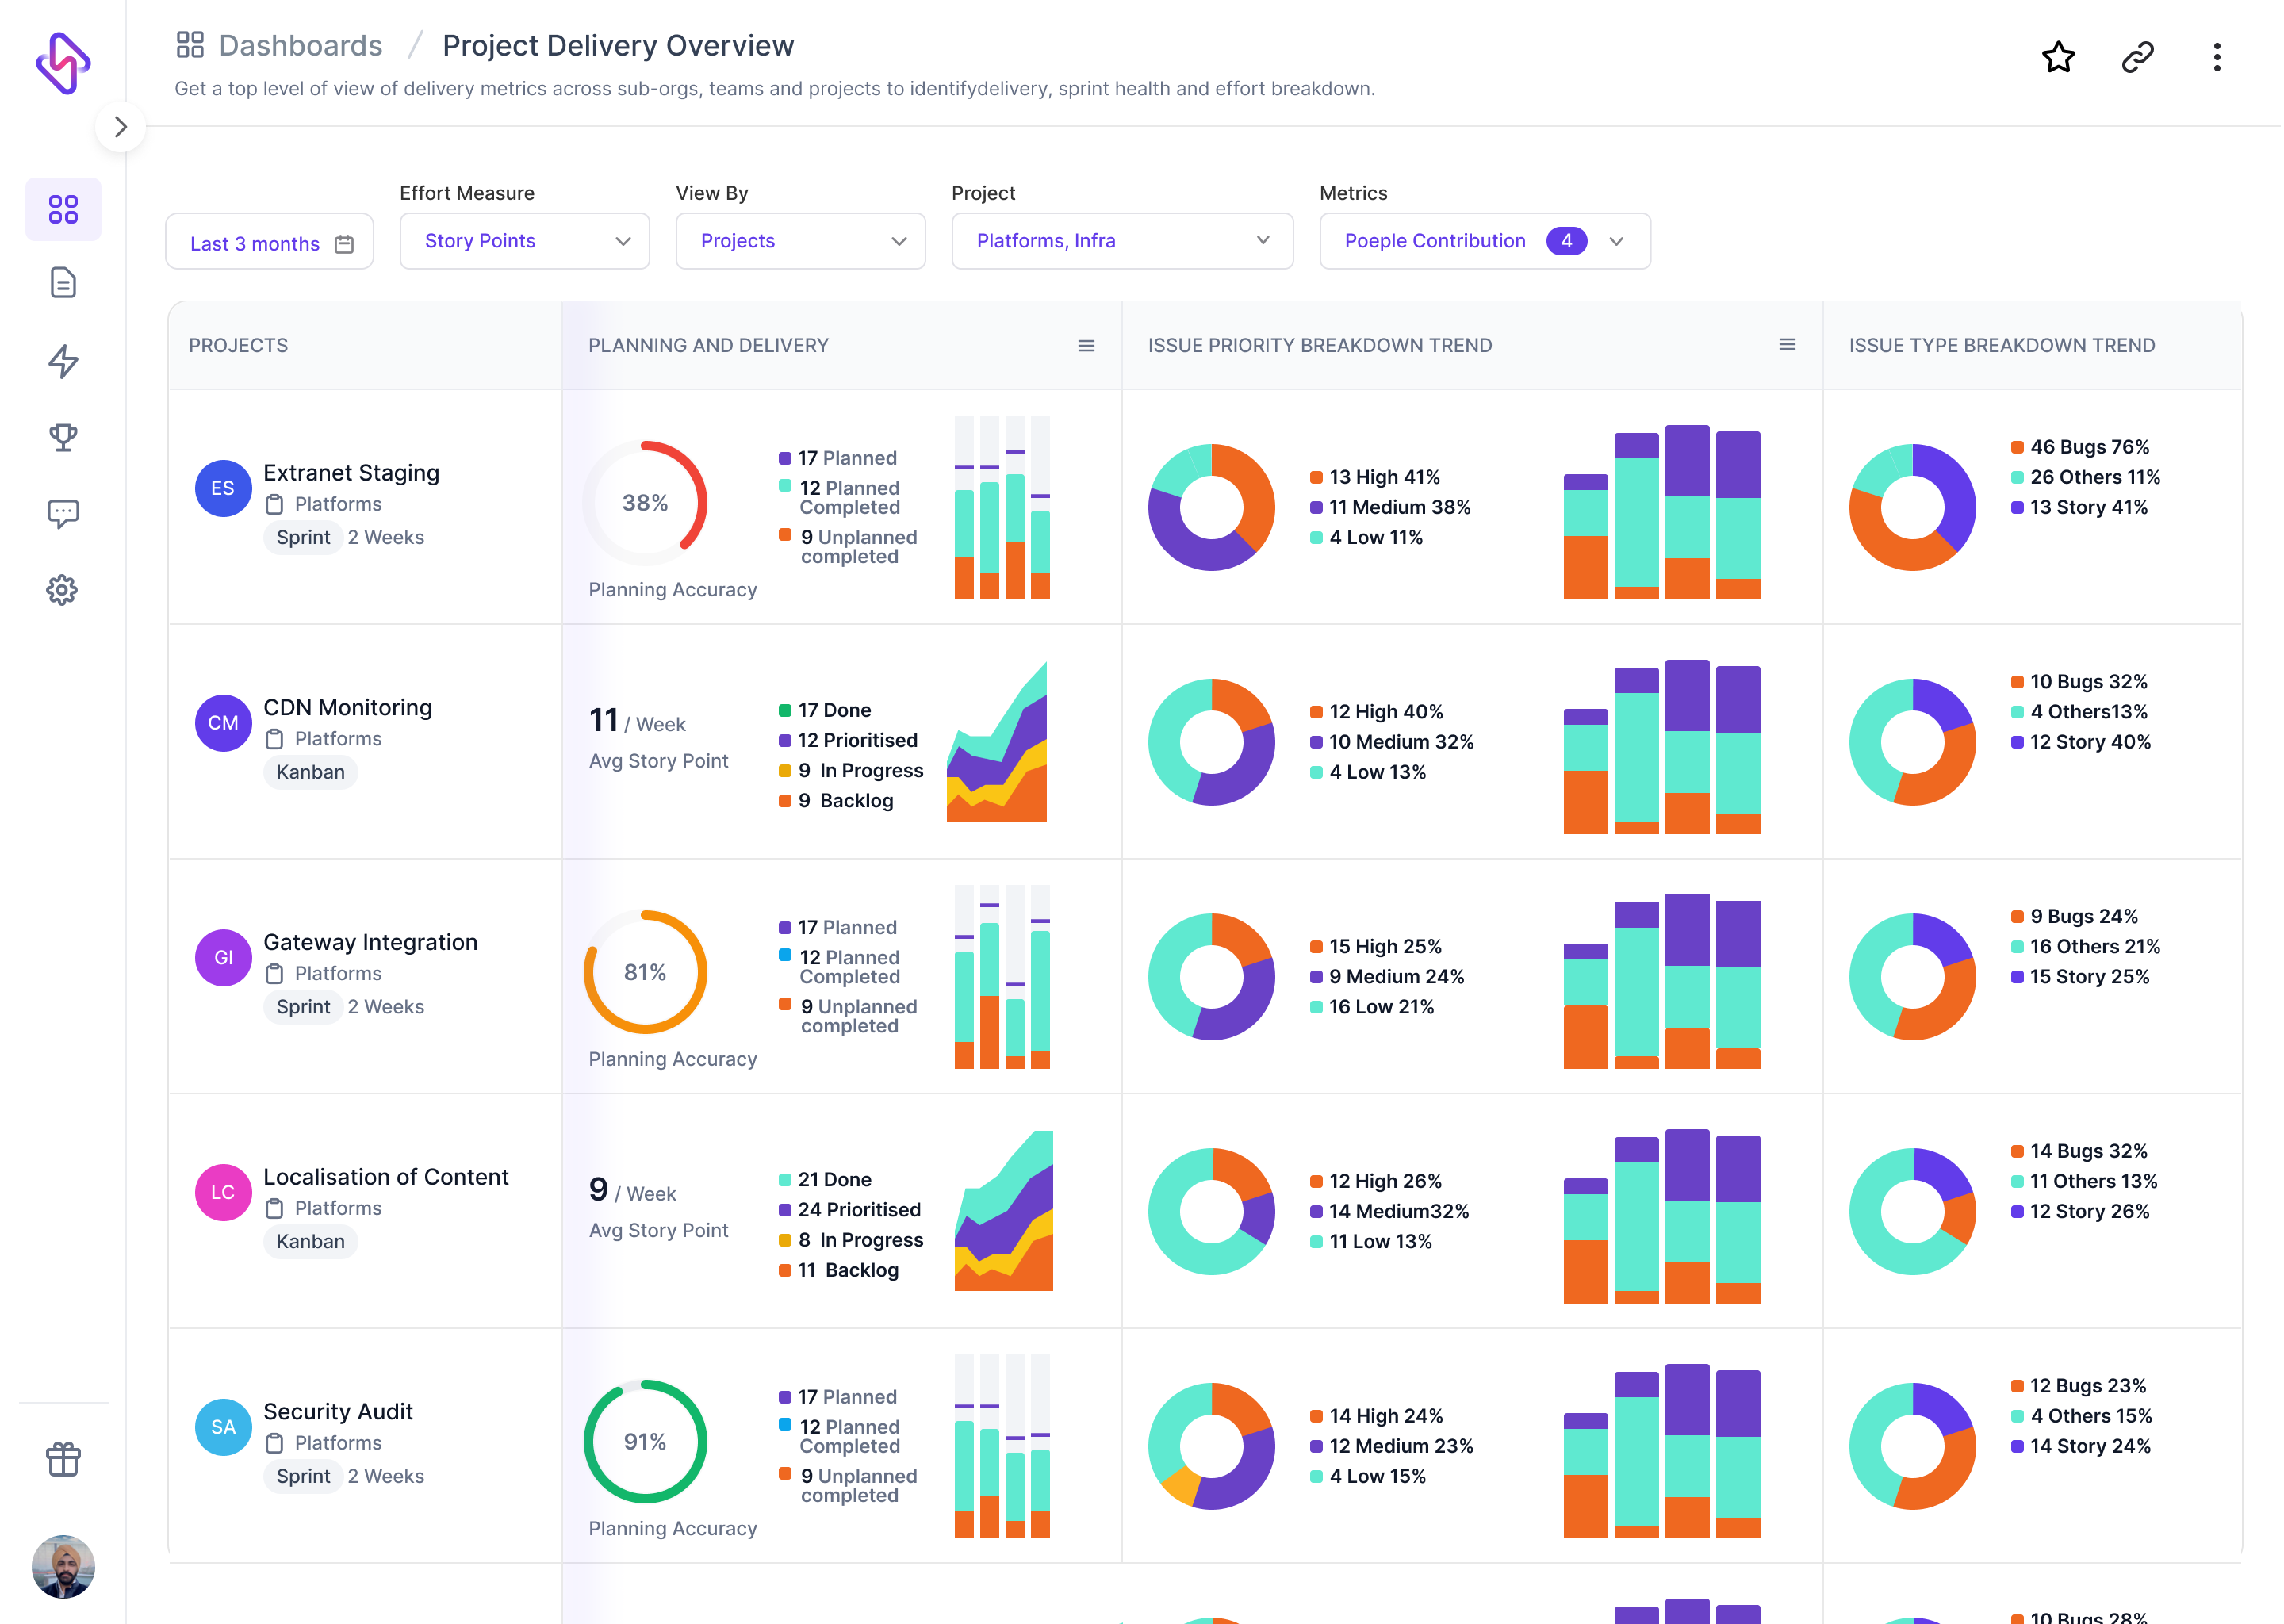 Project Delivery Dashboard: Understand sprint-over-sprint trends around sprint health, planning and delivery, importance of work, and work allocation.